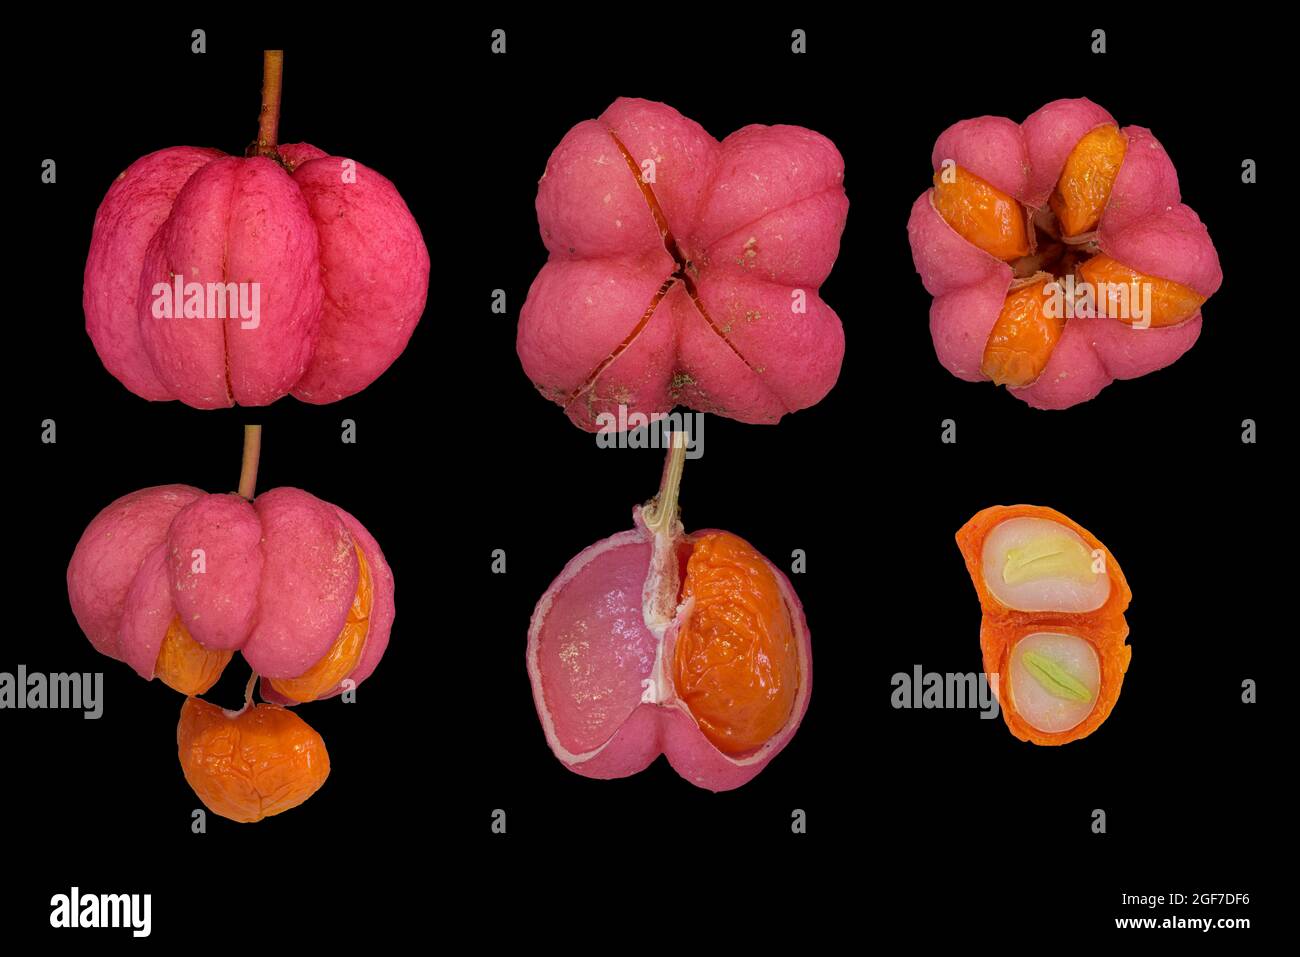 European spindle (Euonymus europaeus), fruit capsule, seed with embryo, photo panel, Germany Stock Photo